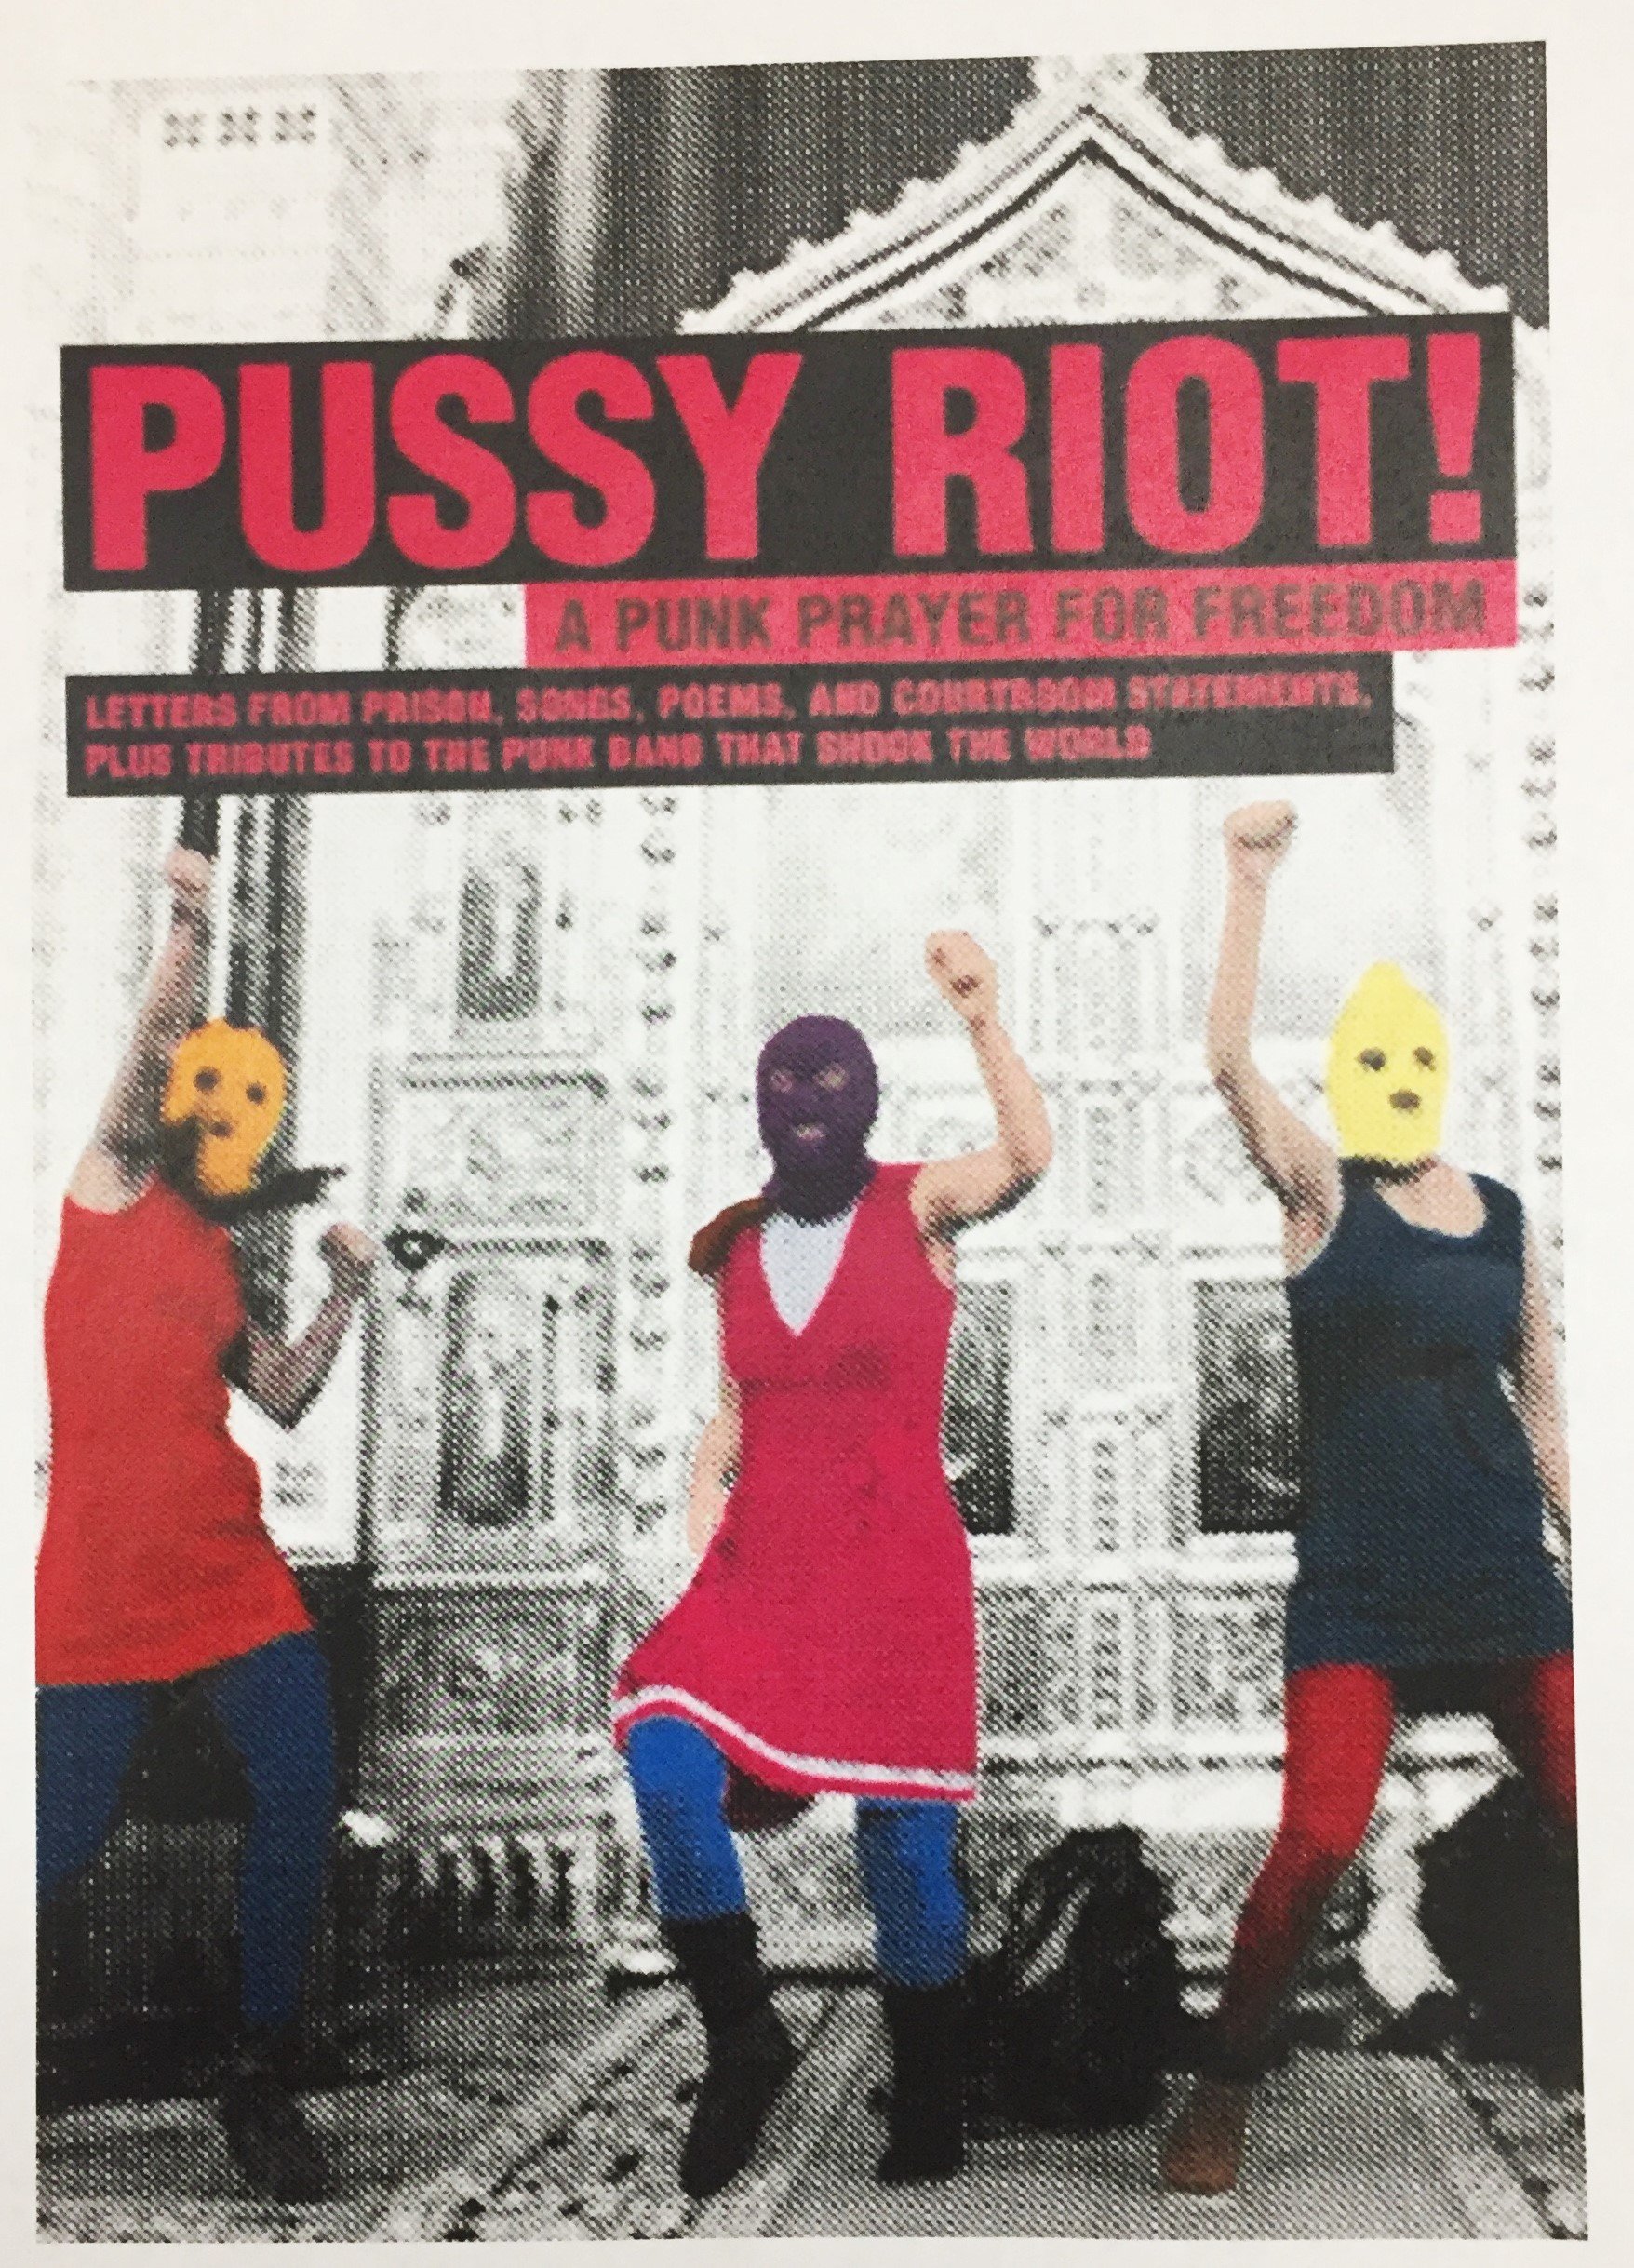 Three women in long tank-tops and leggings with colorful ski masks on, throwing their fists into the air. The words "Pussy Riot!" are printed boldly in red above their heads.